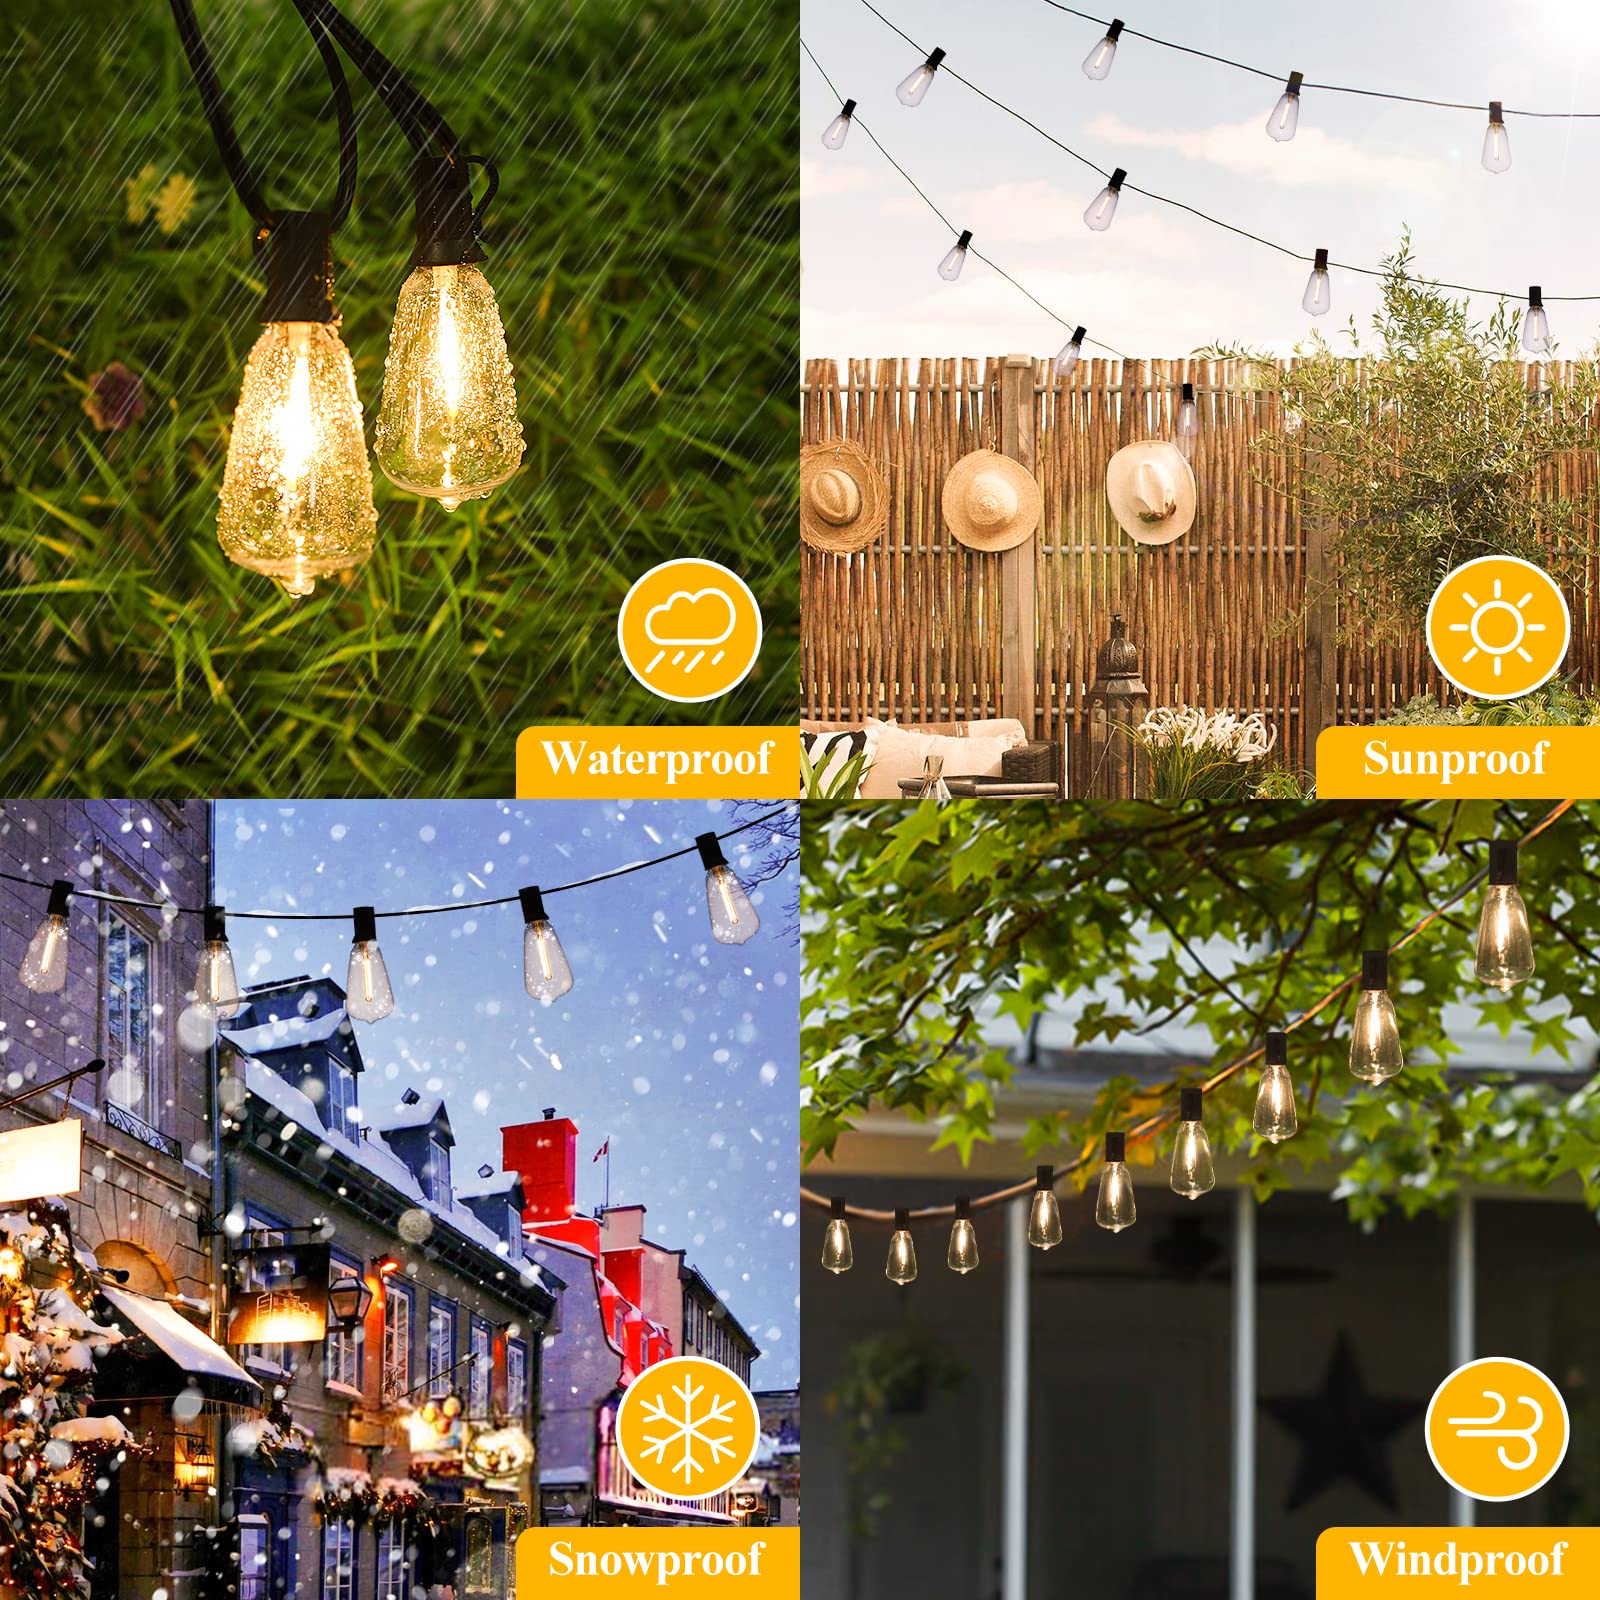 Brightever LED Outdoor String Lights 100FT Patio Lights with 52 Shatterproof ST38 Vintage Edison Bulbs, Outside Hanging Lights Waterproof for Porch, Deck, Garden, Backyard, Balcony, 2700K Dimmable